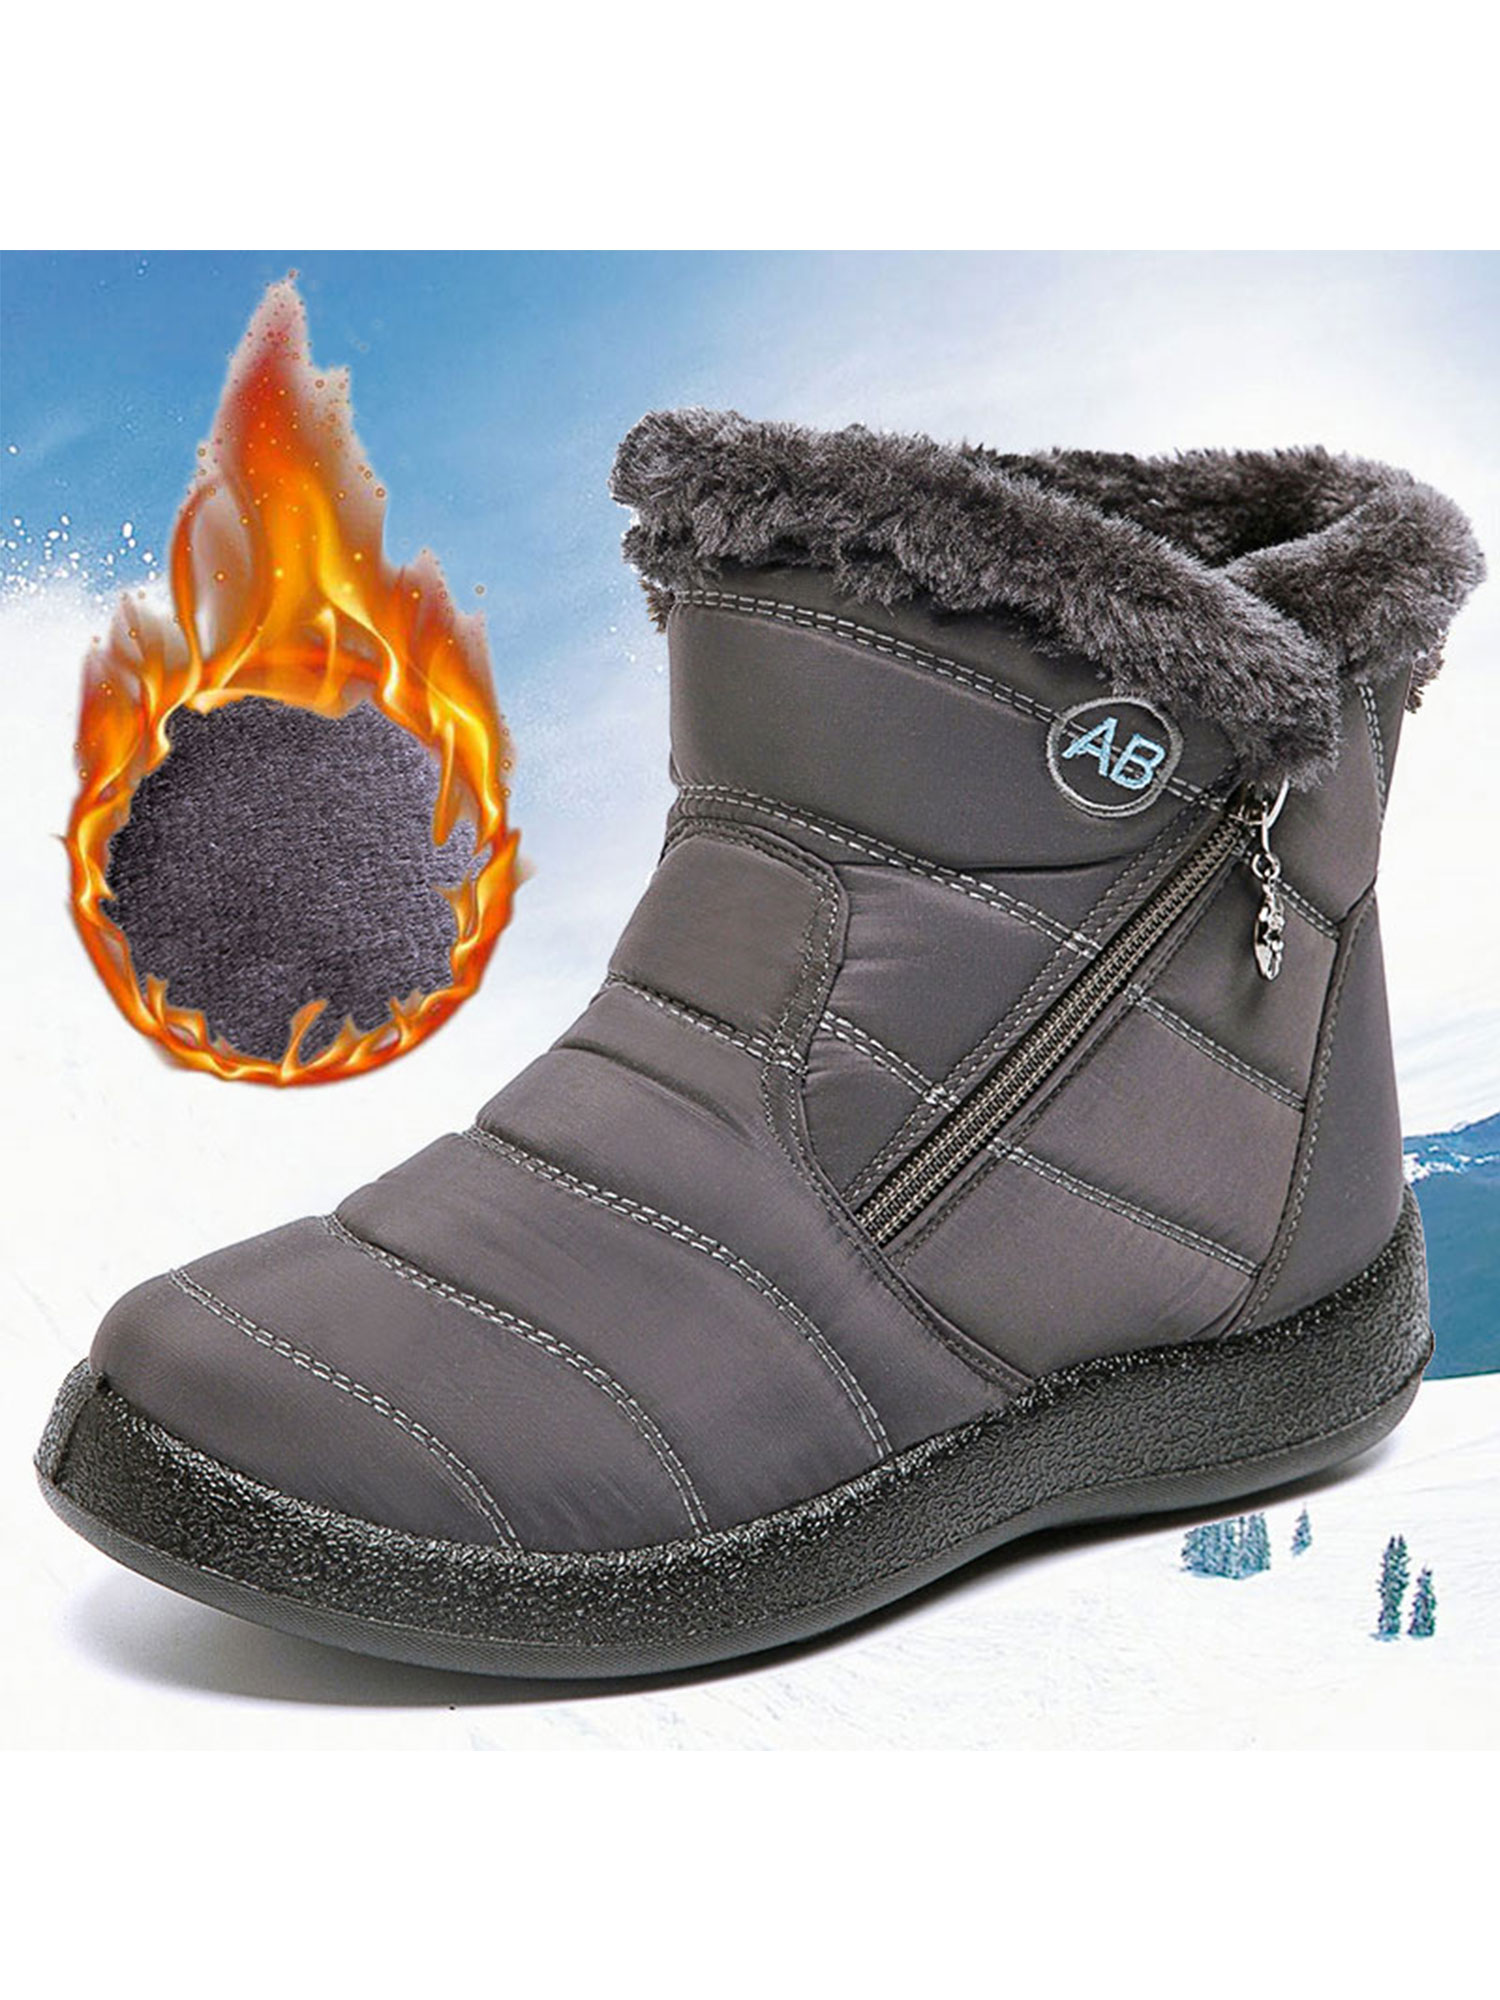 Women Winter Warm Shoes Snow Boots Fur-lined Warm Ankle Shoes Waterproof Outdoor